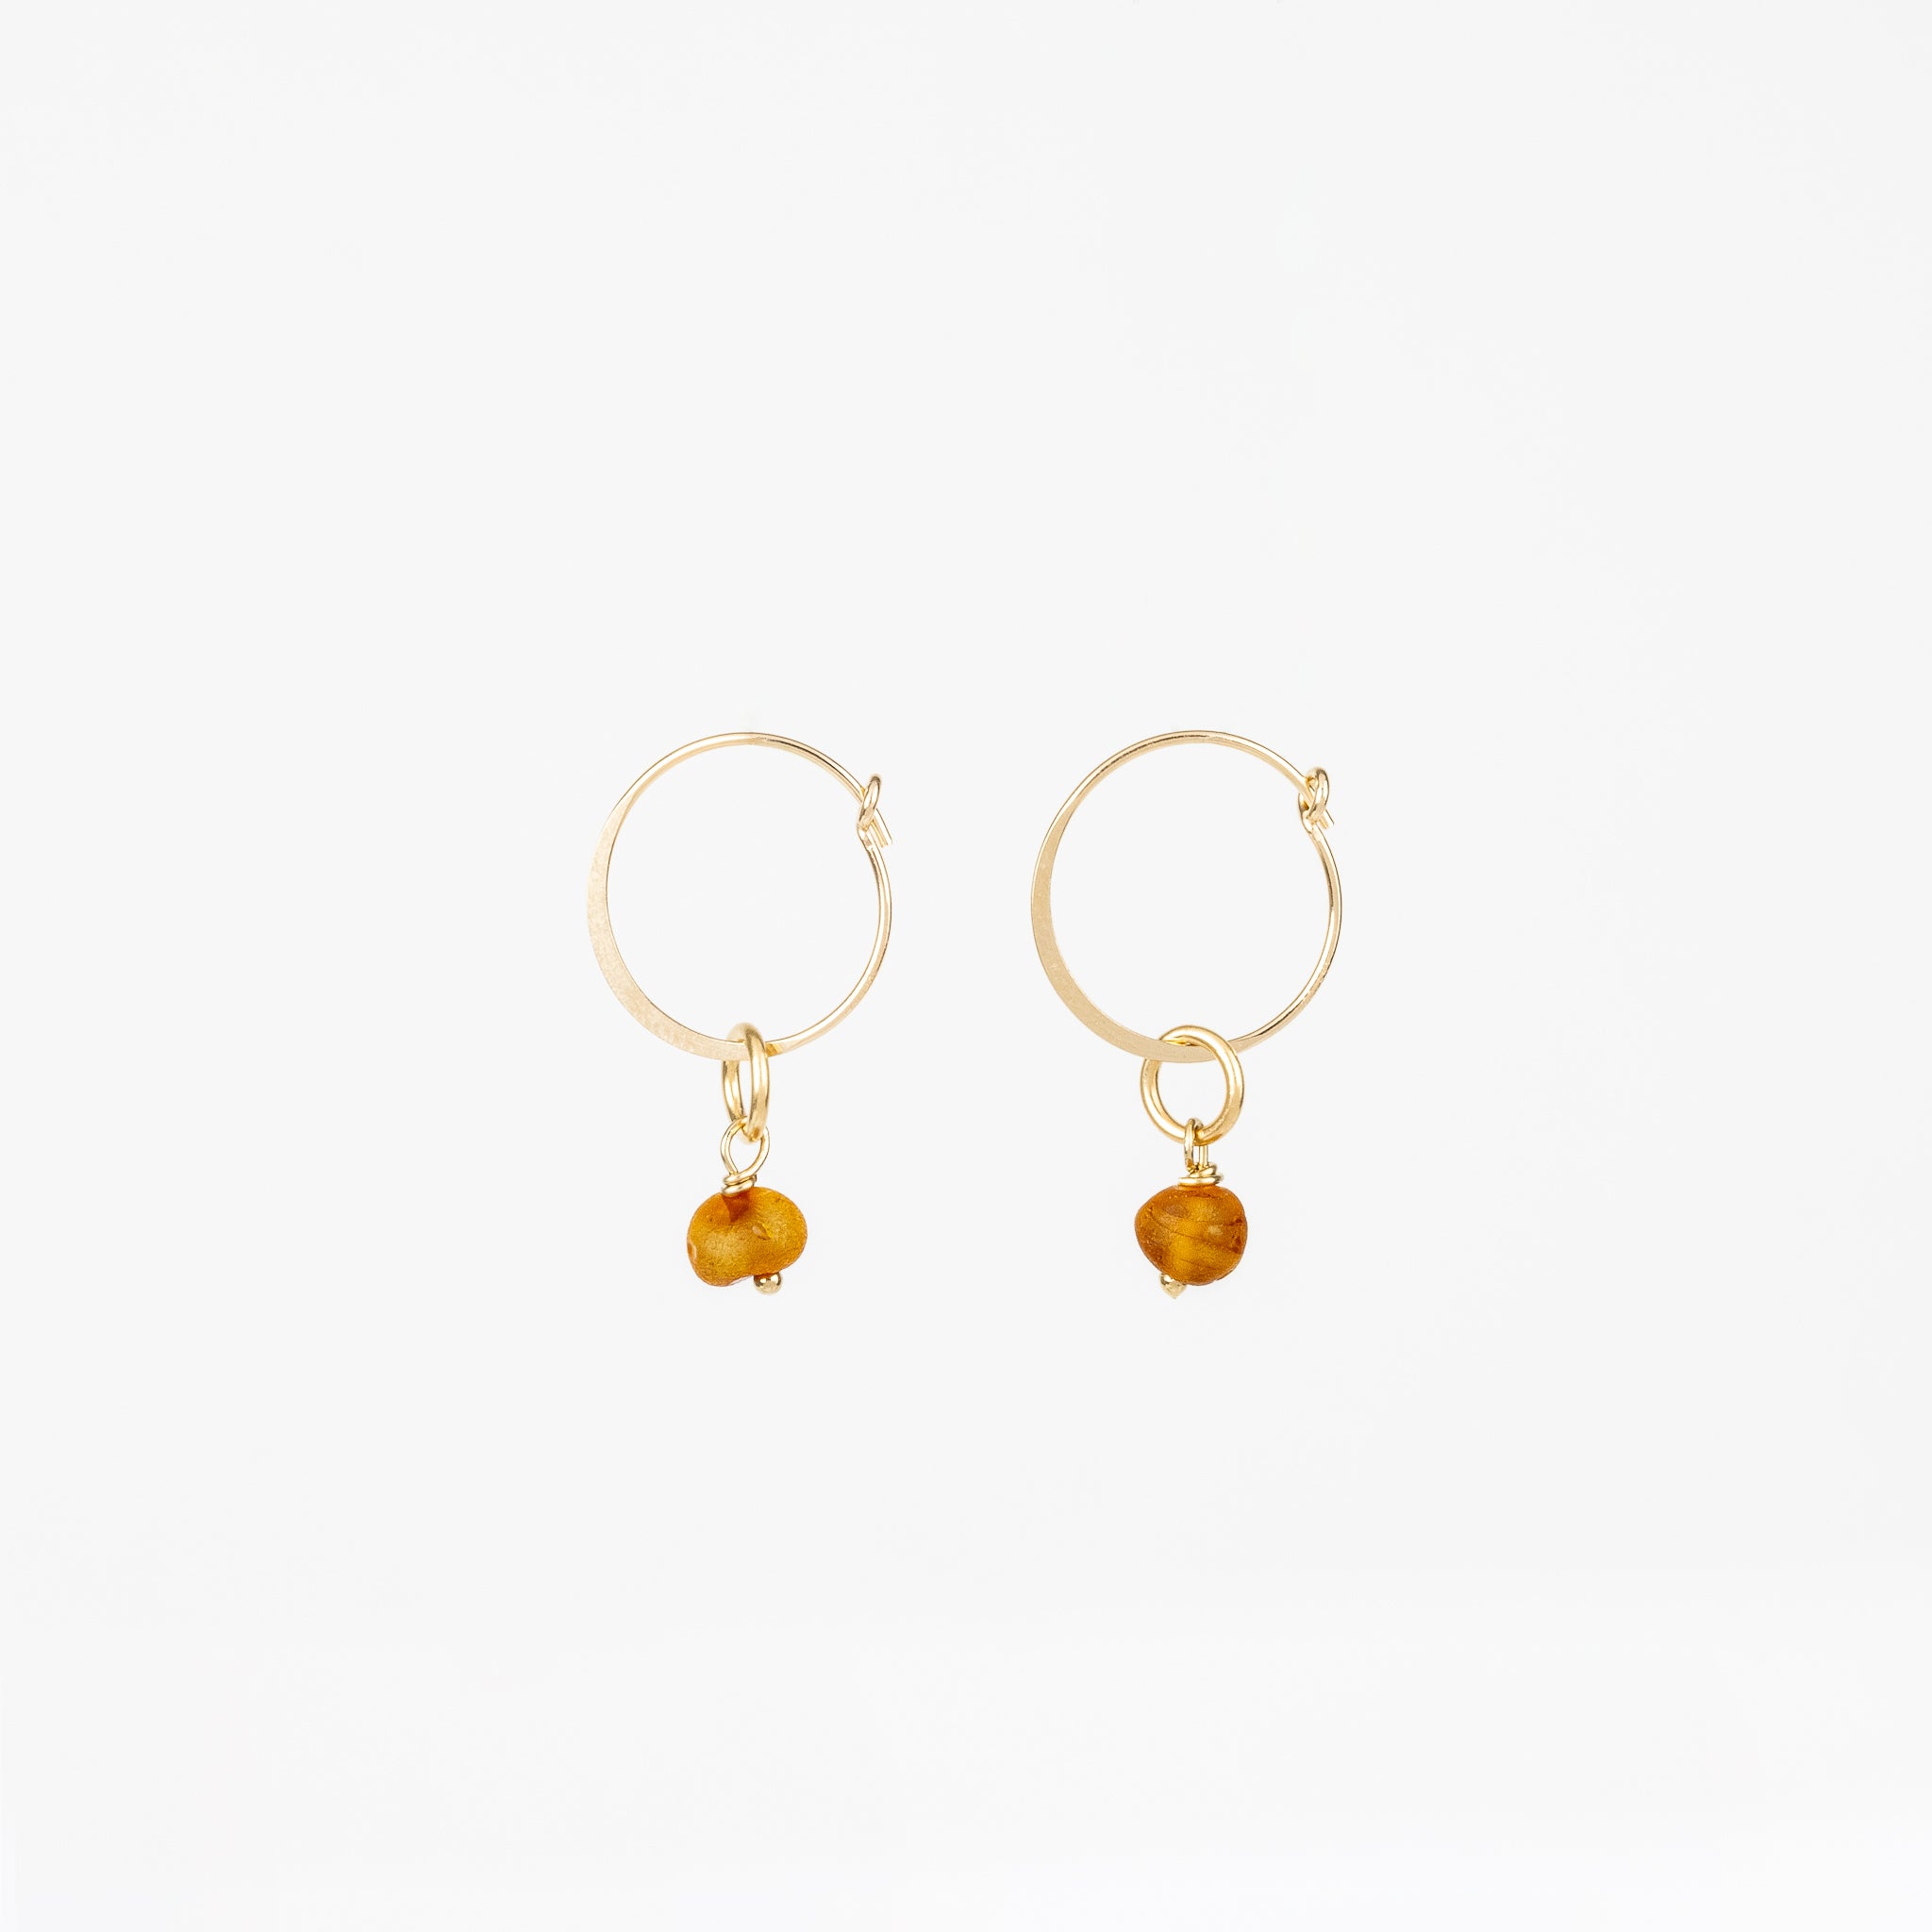 The Baltic Amber - Amber Gold Removable Charm Earrings